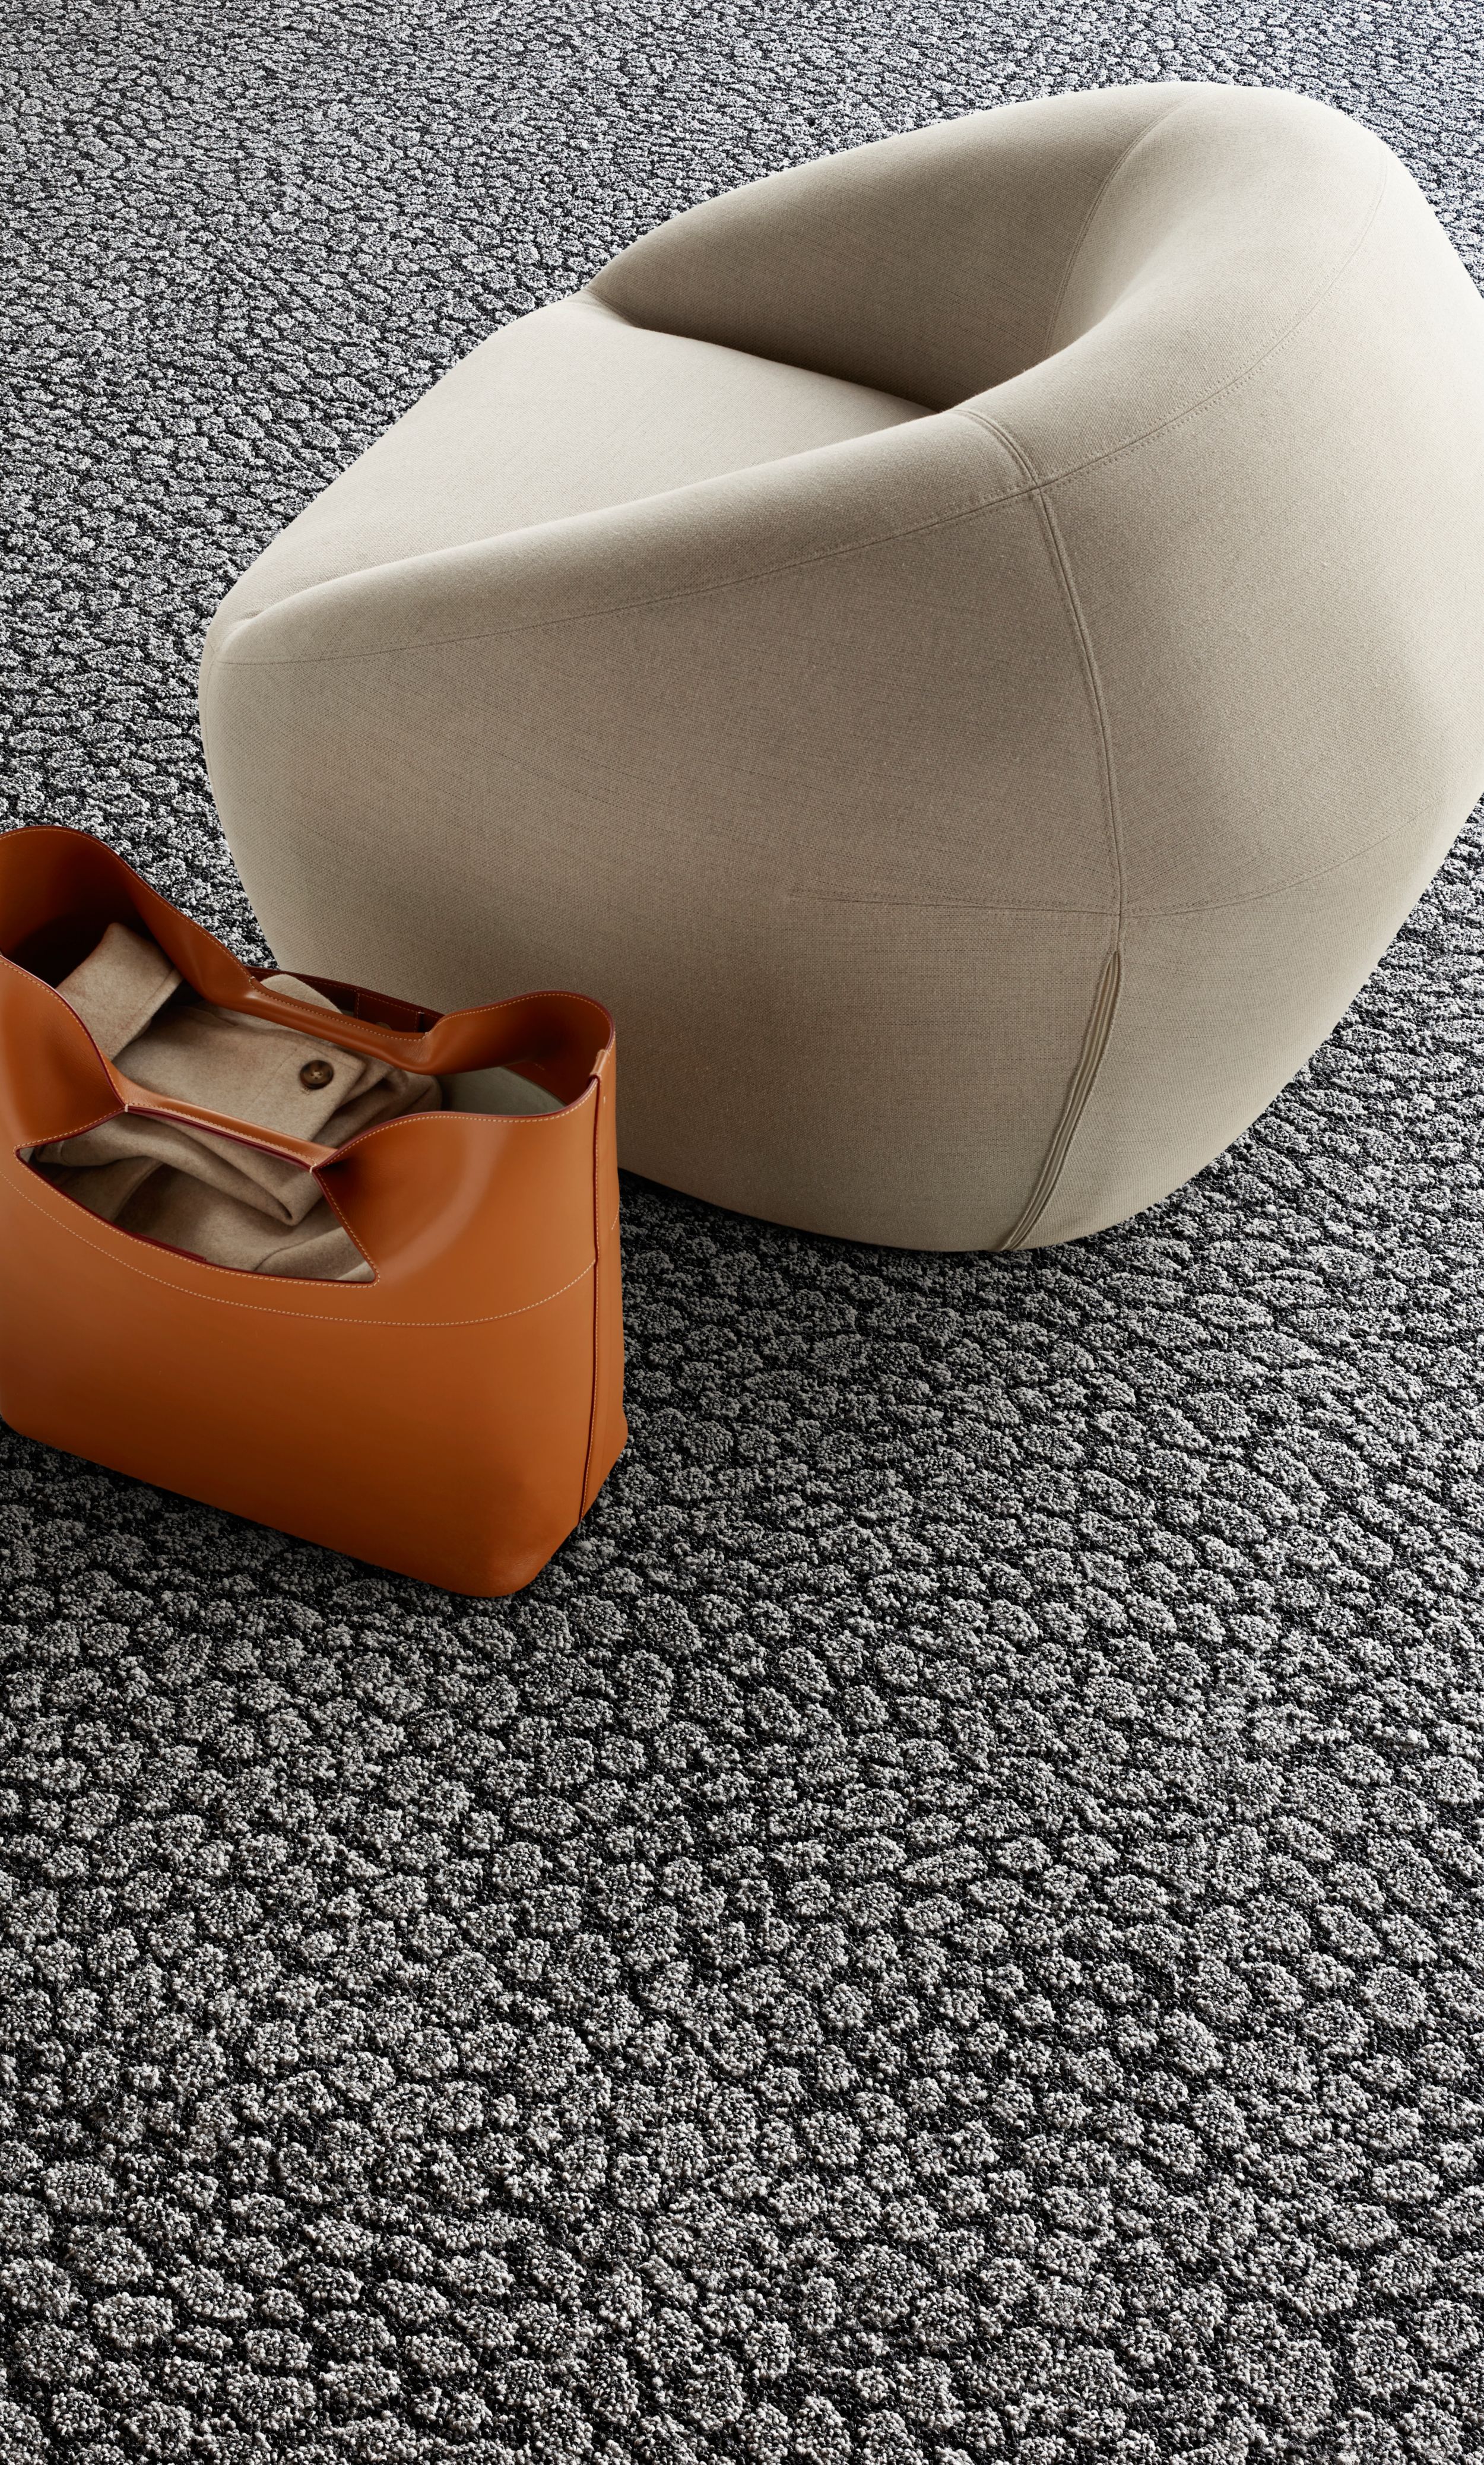 Interface E611 carpet tile detail with low chair and orange tote image number 2